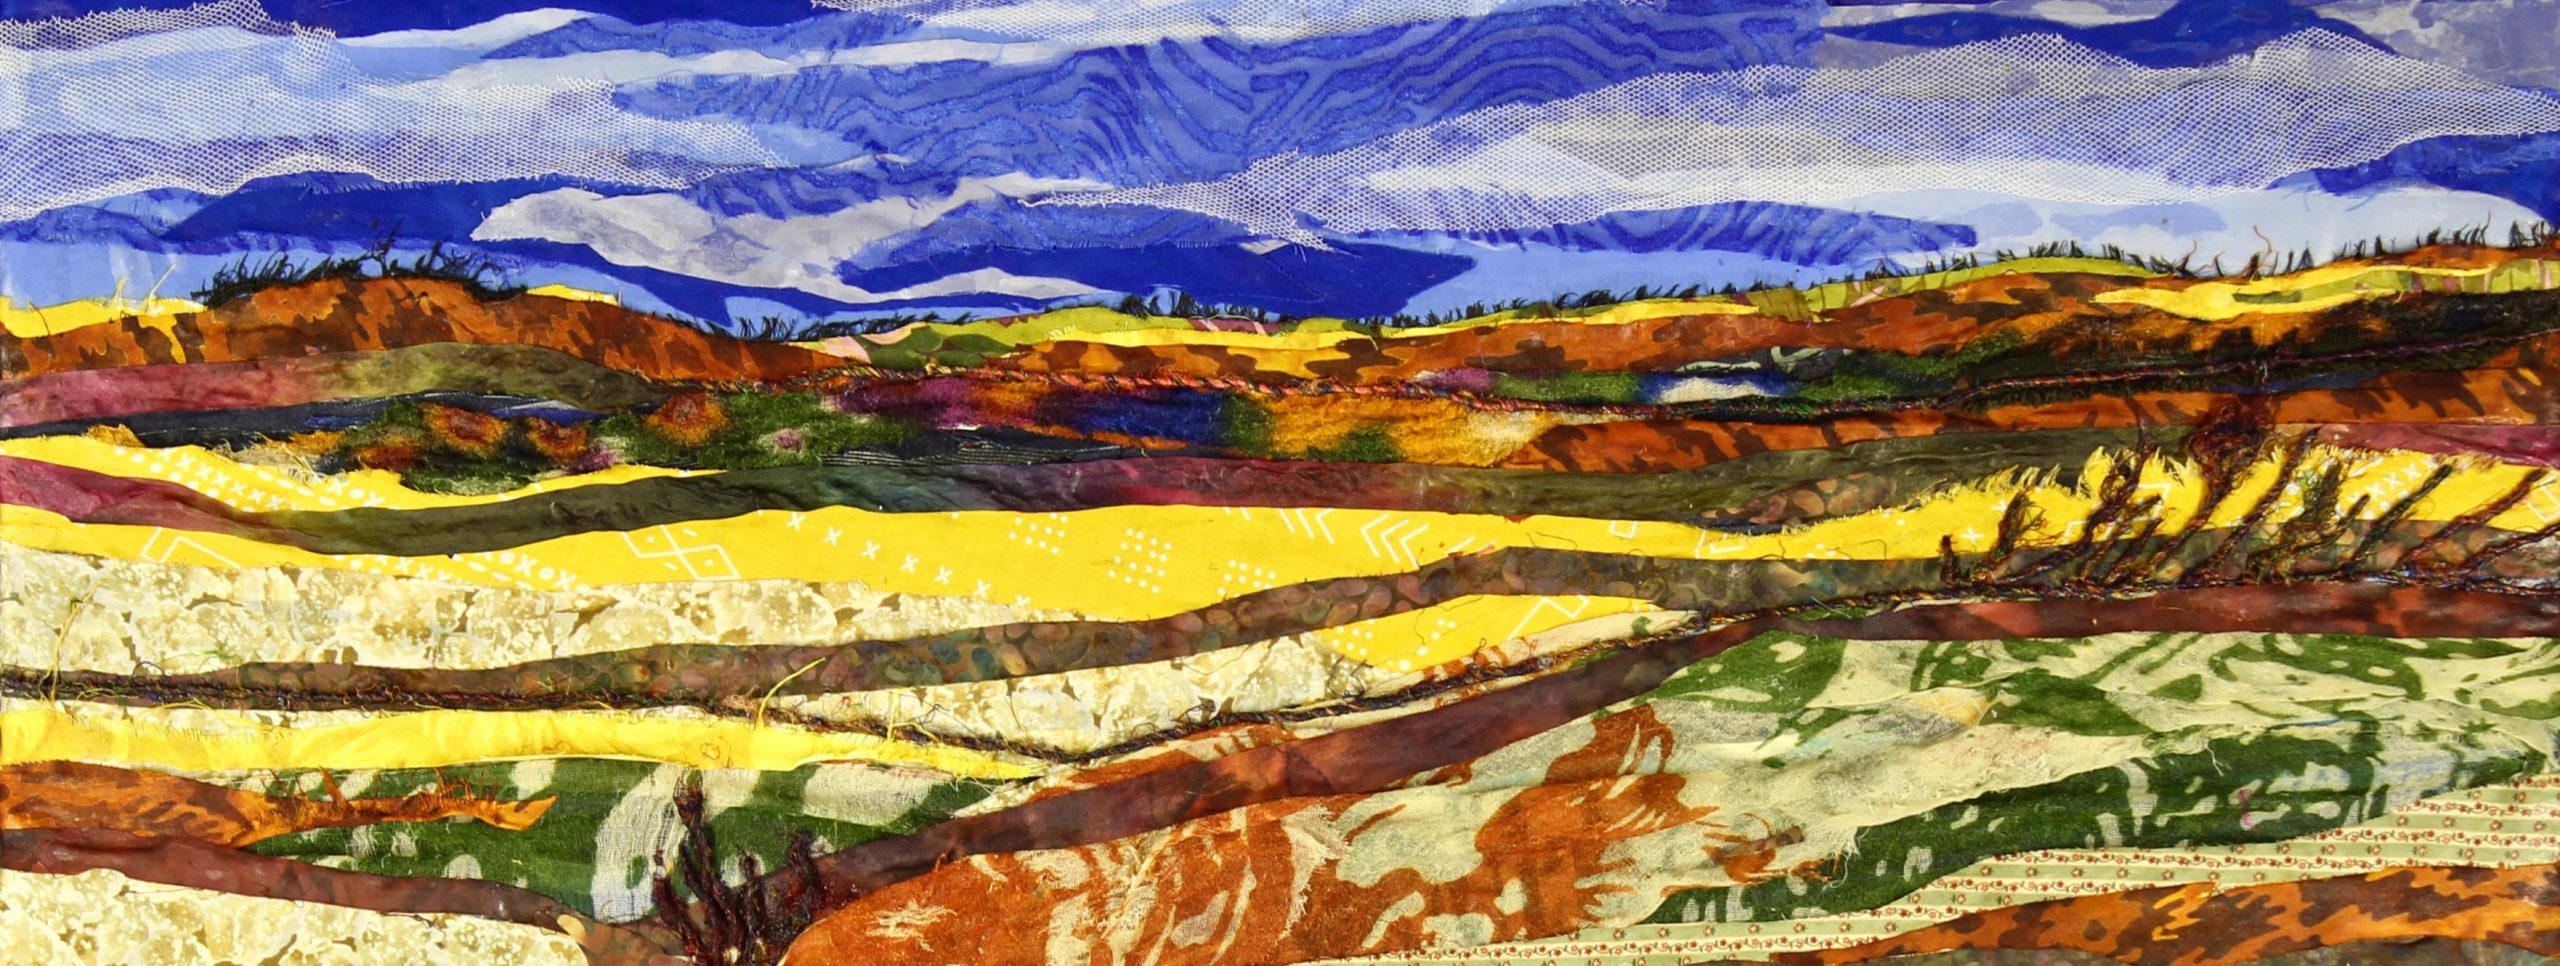 Fabric art by artist Pam Collins titled "Fall on the Prairie"